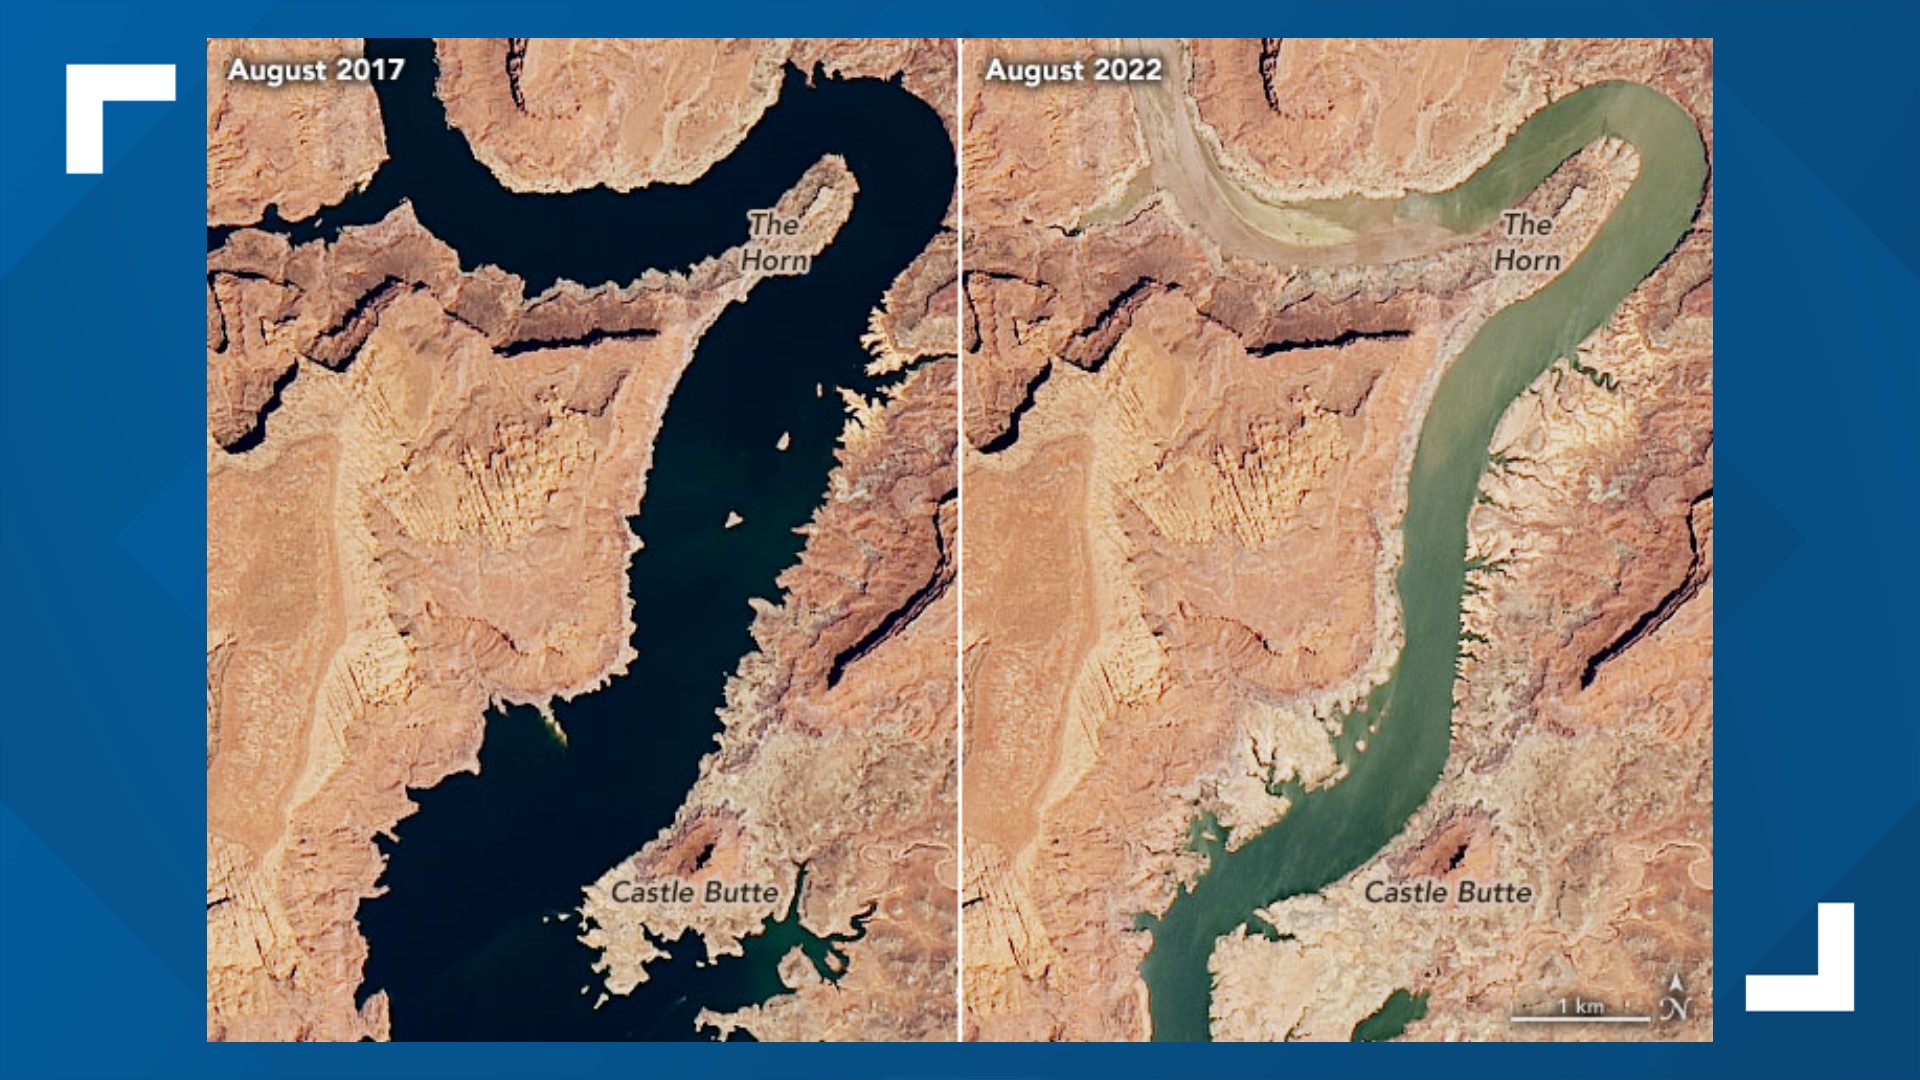 New NASA satellite images show Lake Powell's dry up over 5 years